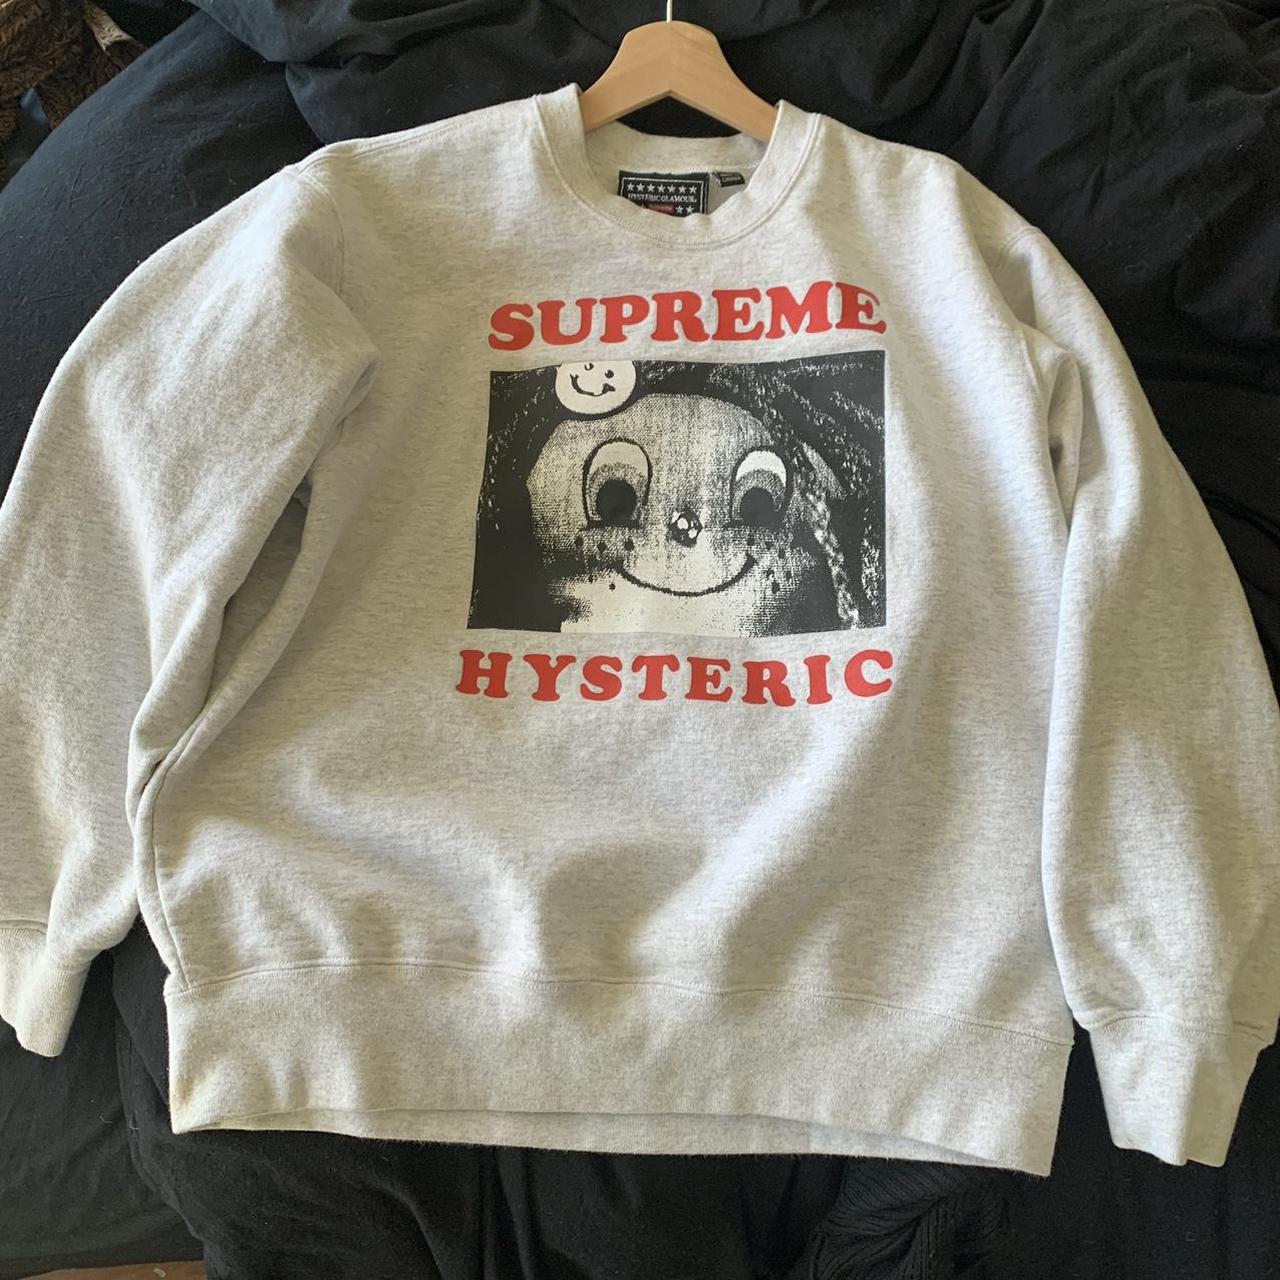 Supreme x Hysteric Glamour Crewneck (SS21) in Ash...